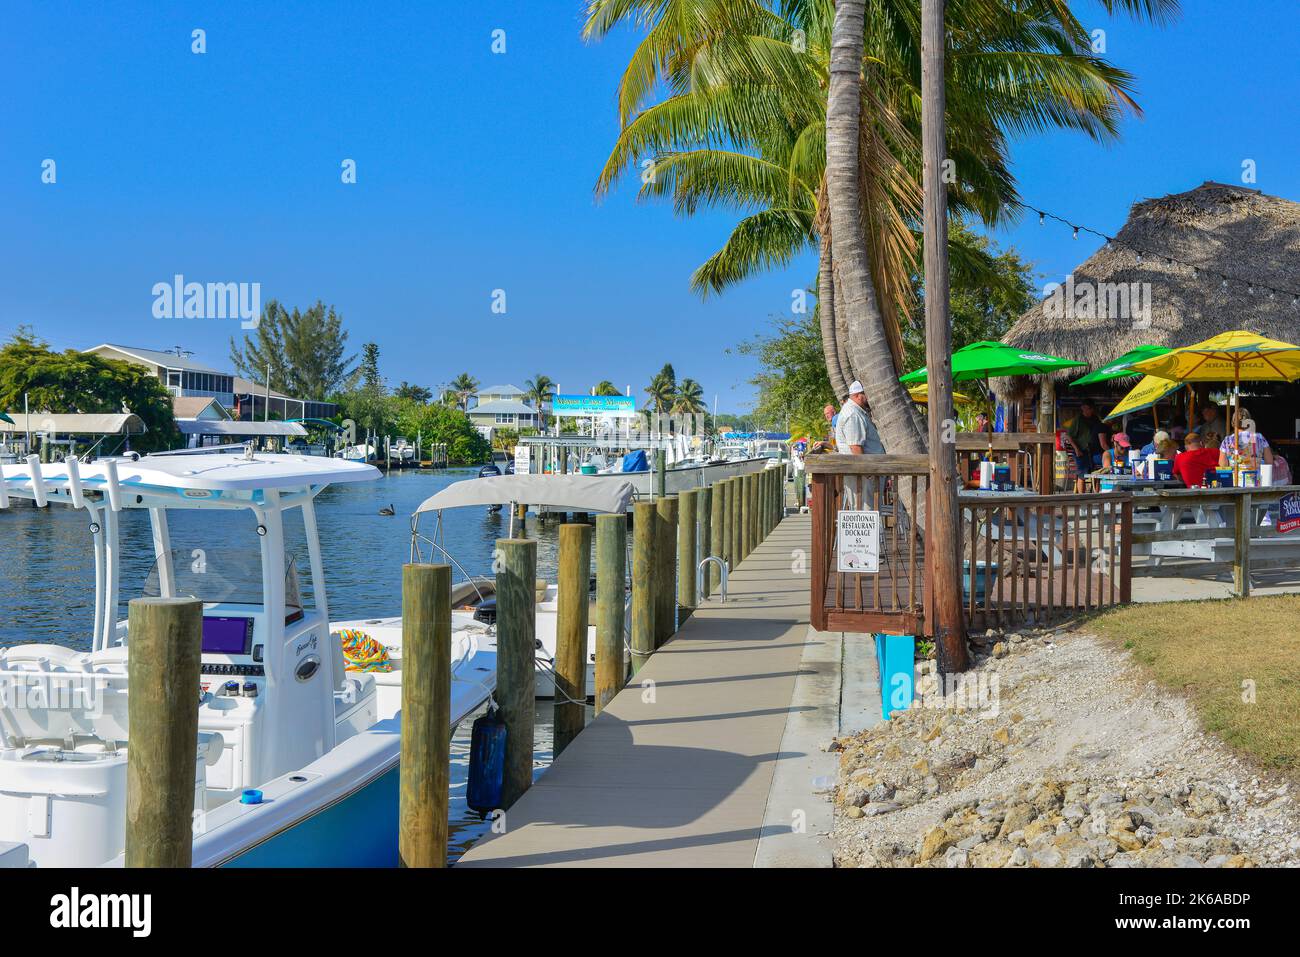 A view of the canals with docked boats, alongside Phuzzy's Boat Shack restaurant and bar with thatched roofs and outdoor dining in St. James City, FL, Stock Photo